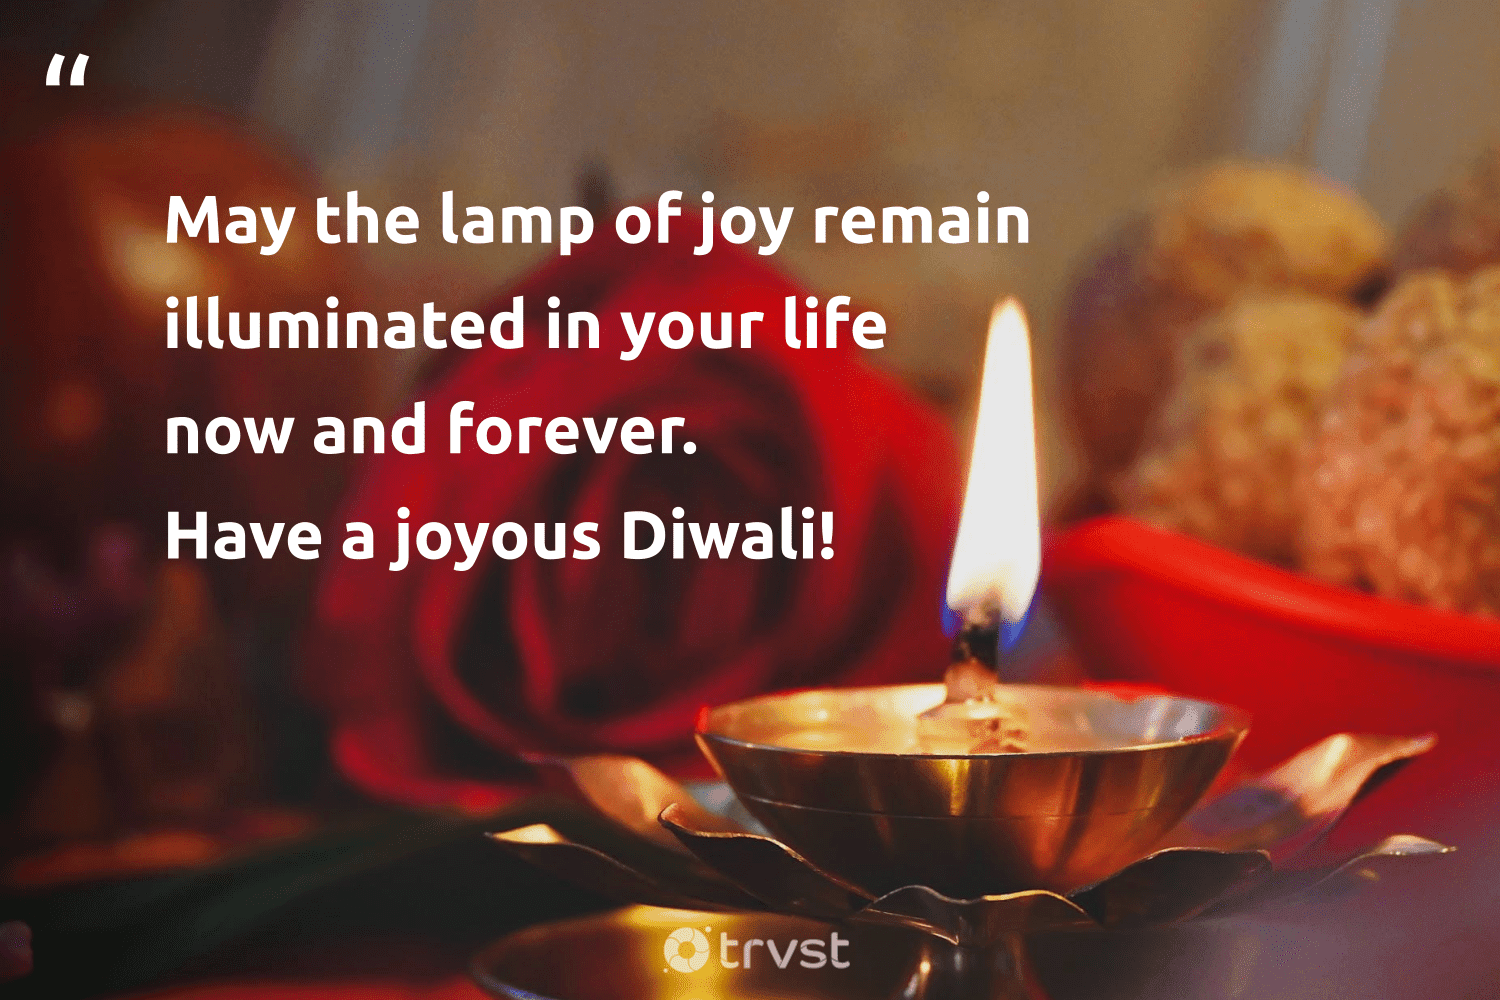 diwali quotes may the lamp of joy remai 311